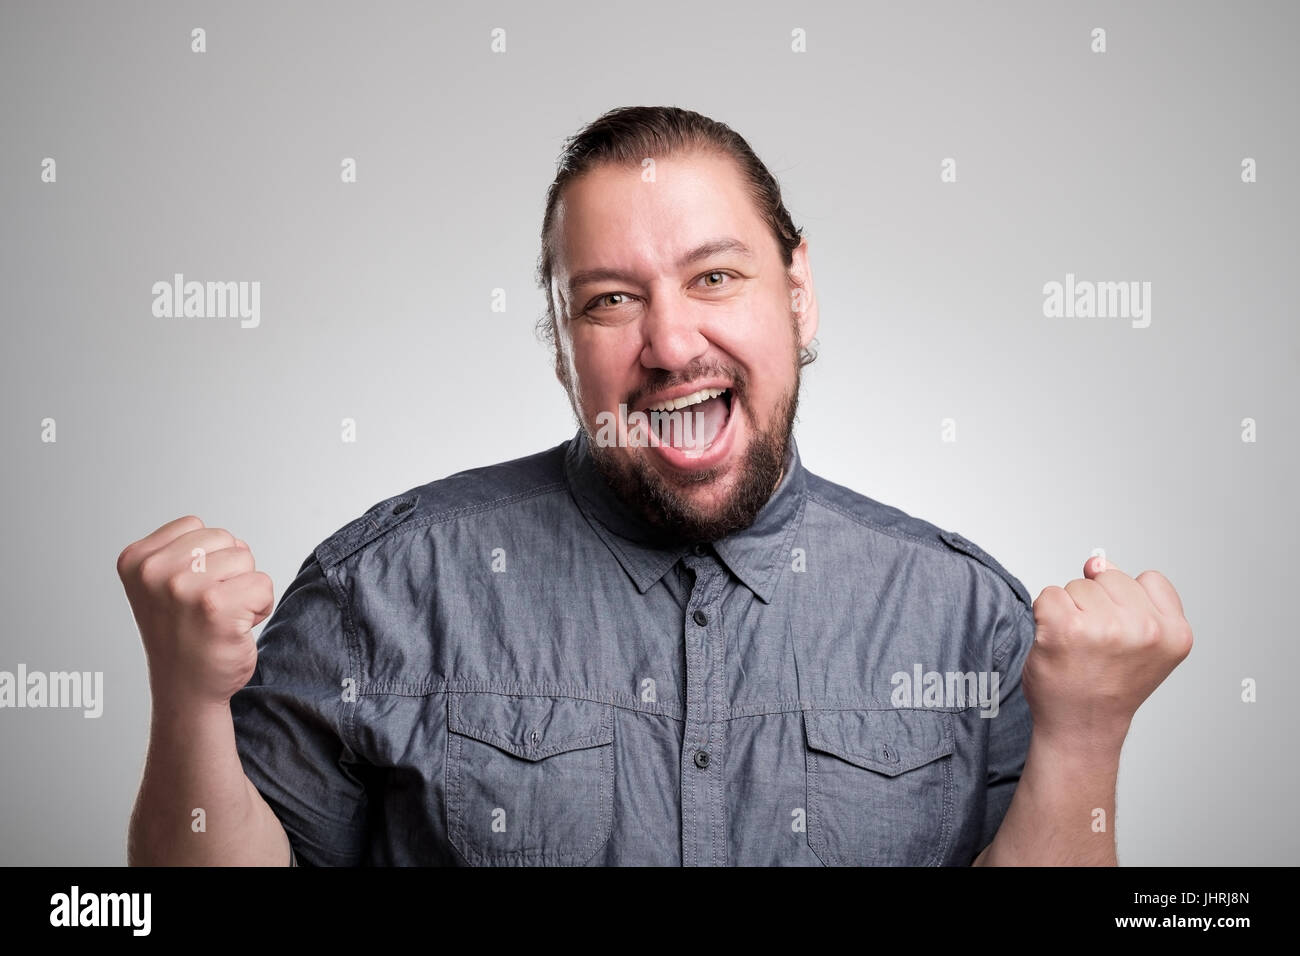 I won Happy young man gesturing and smiling while standing against gray background Stock Photo